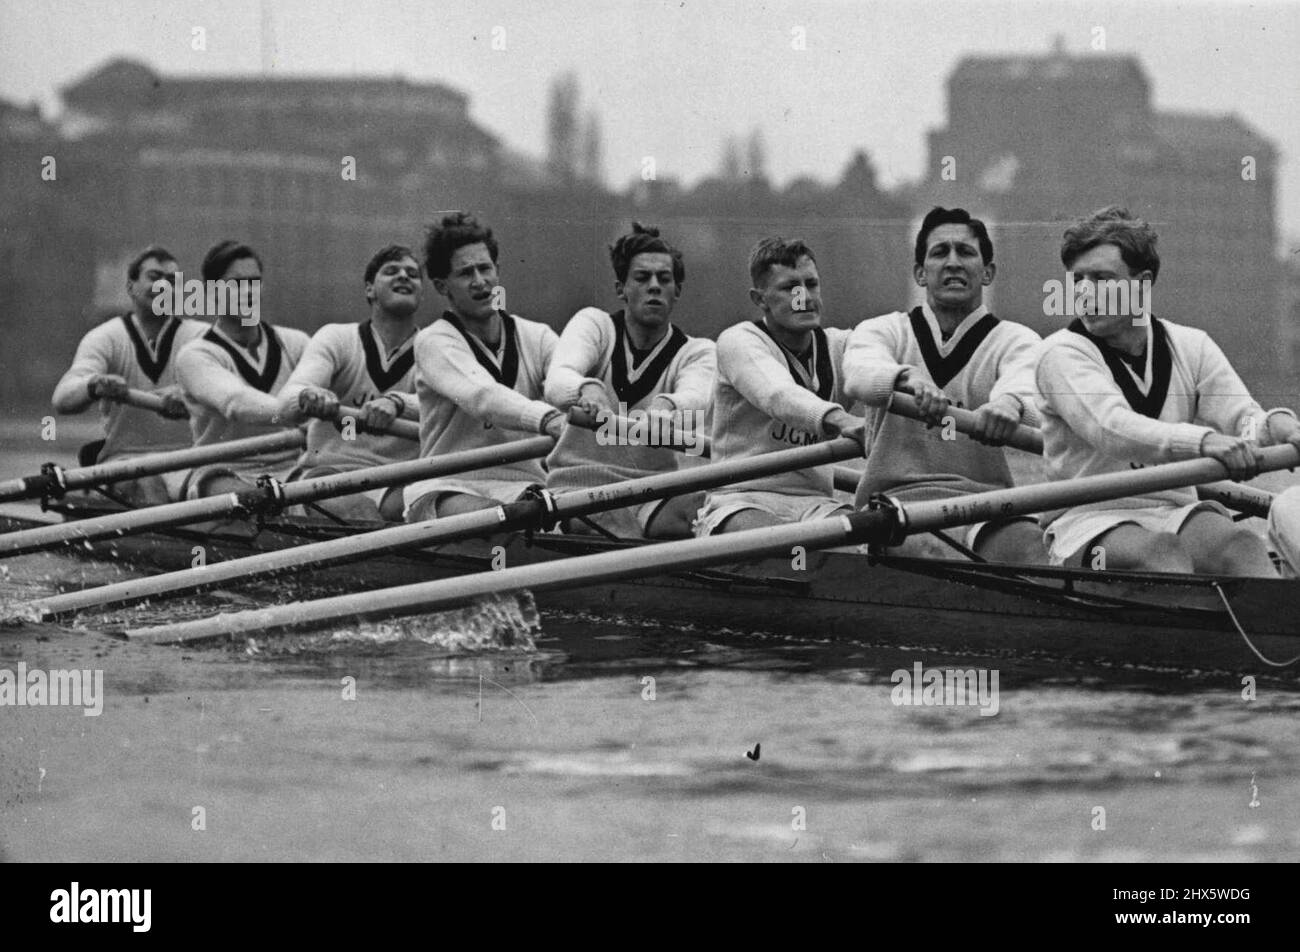 The Boat Race: The Oxford Eight At Work -- A fine action picture as the Oxford eight pull out for a practice spin. L to R: -J.A.Gobbo - bow, (Melbourne Univ.); E.V.Vine (Geelong, Australia.B.N.C.); J.M. Wilson; D.P.Wells; R.D.Rakes; J.G. McCleaod (Sydney Univ.): E.O.G.Pain (Sydney Univ.); G.Sorrel - stroke: and I.A.Watson, the cox. The Oxford University eight have now arrived on the river Thames for their final training in readiness for the annual Boat Race against their Cambridge University rivals. March 9, 1955. (Photo by Sport & General Press Agency Ltd.). Stock Photo